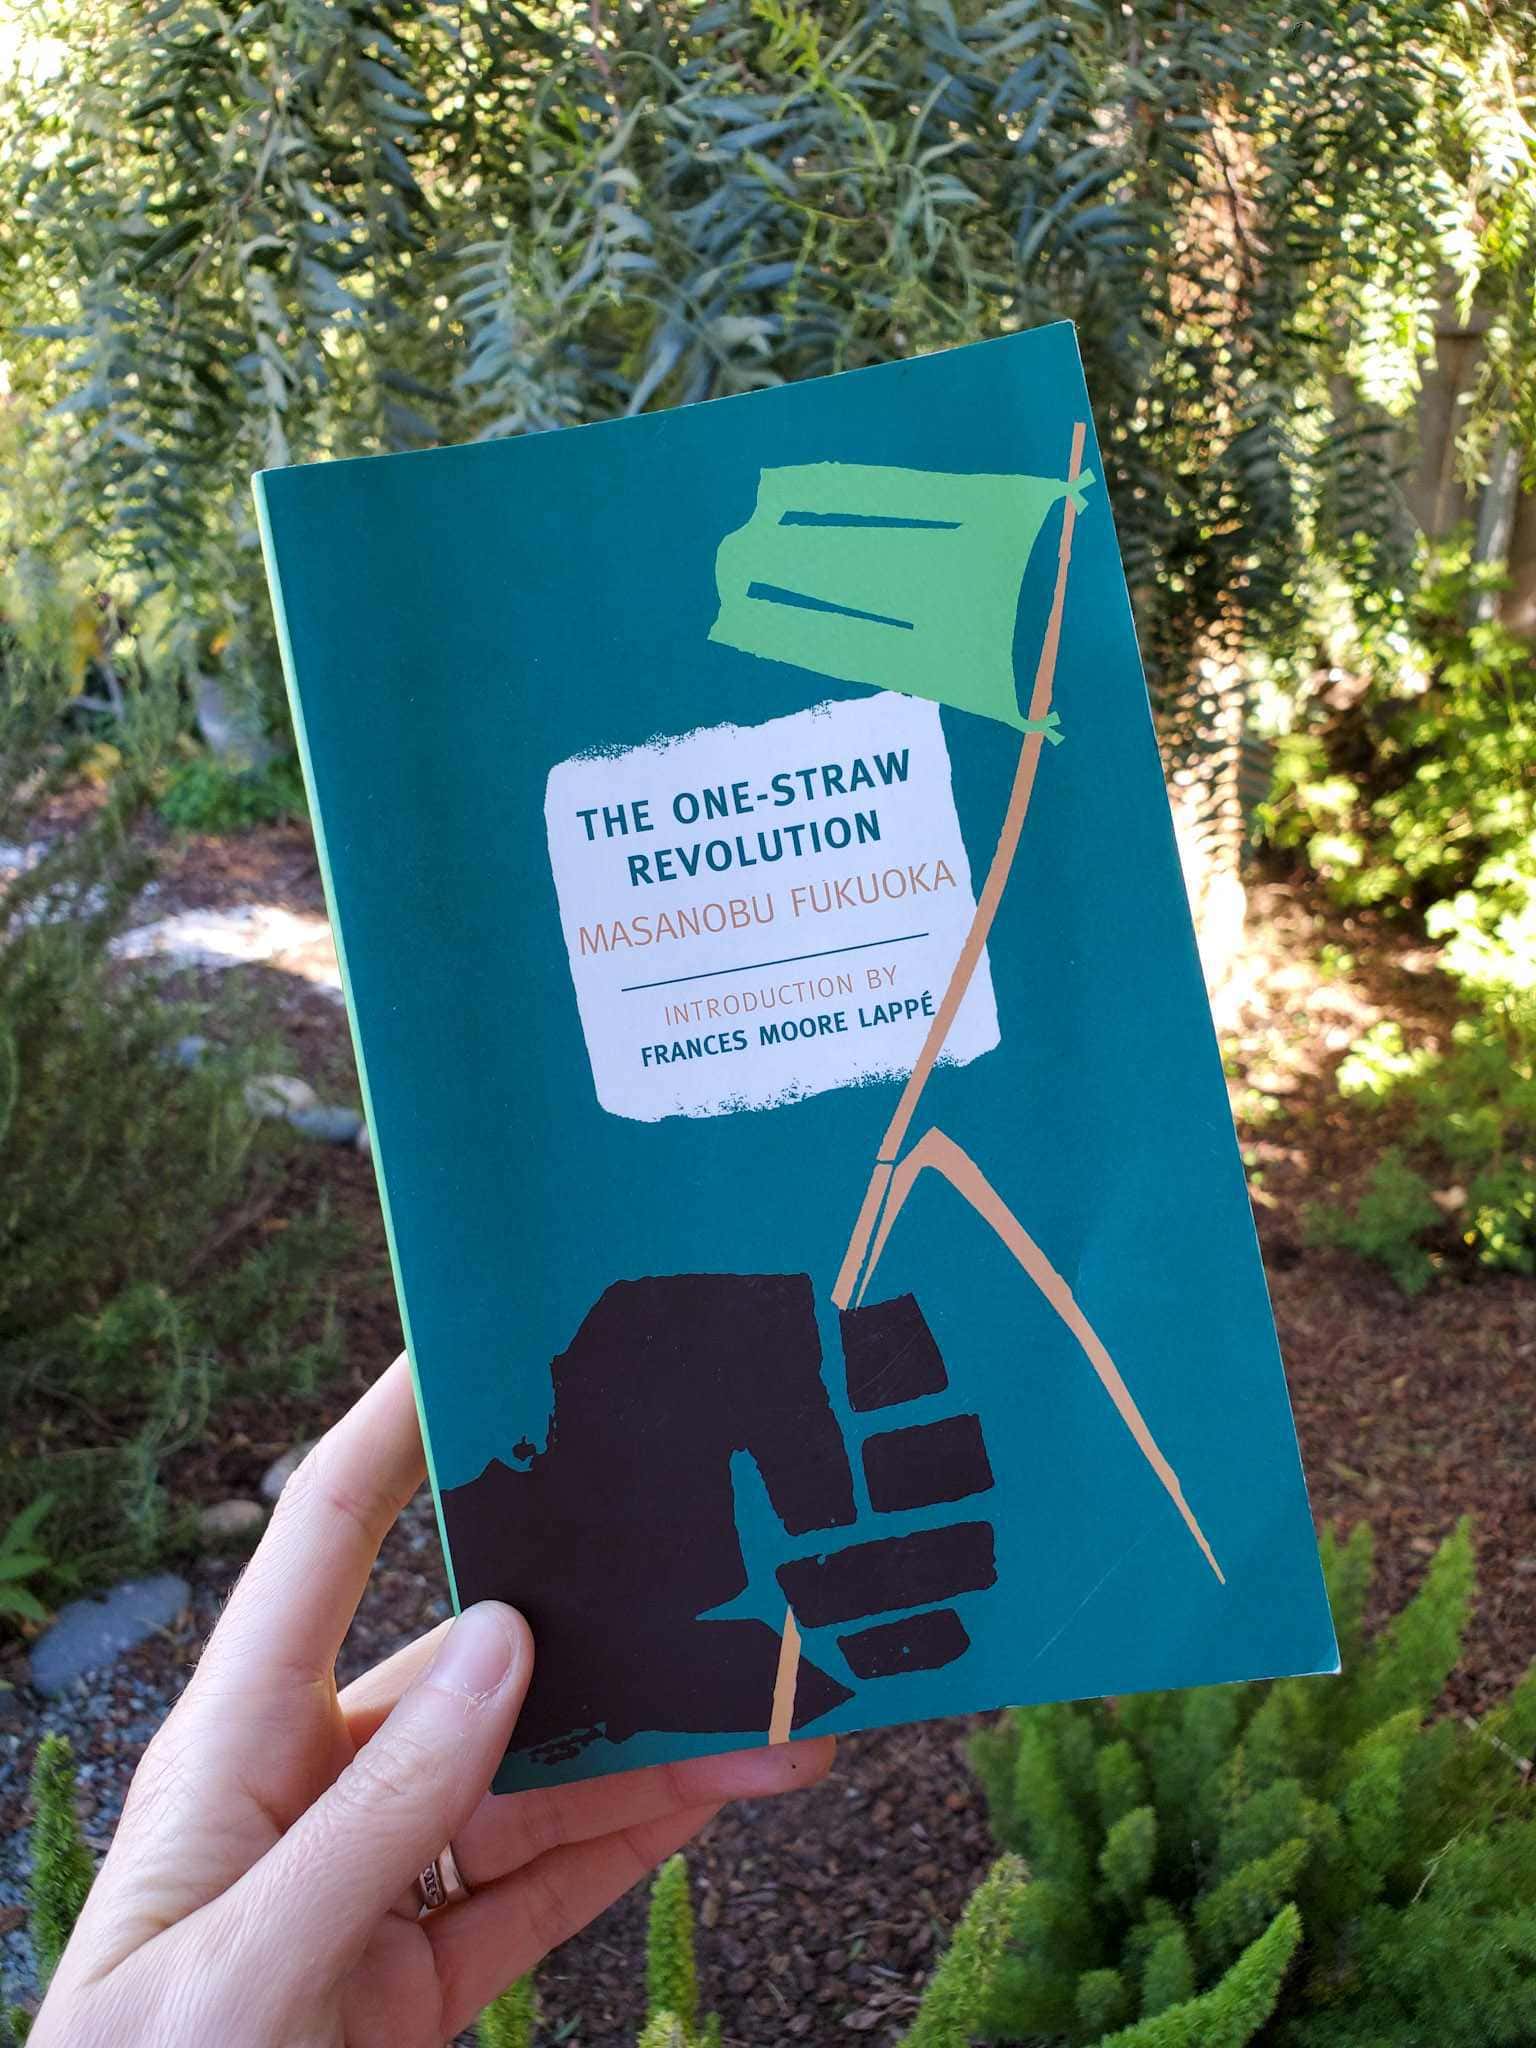 DeannaCat is holding the book, "One Straw Revolution" by Masanobu Fukiuoka. Beyond lies a yard space with rosemary, foxtail ferns, a pepper tree, and various other plants. 